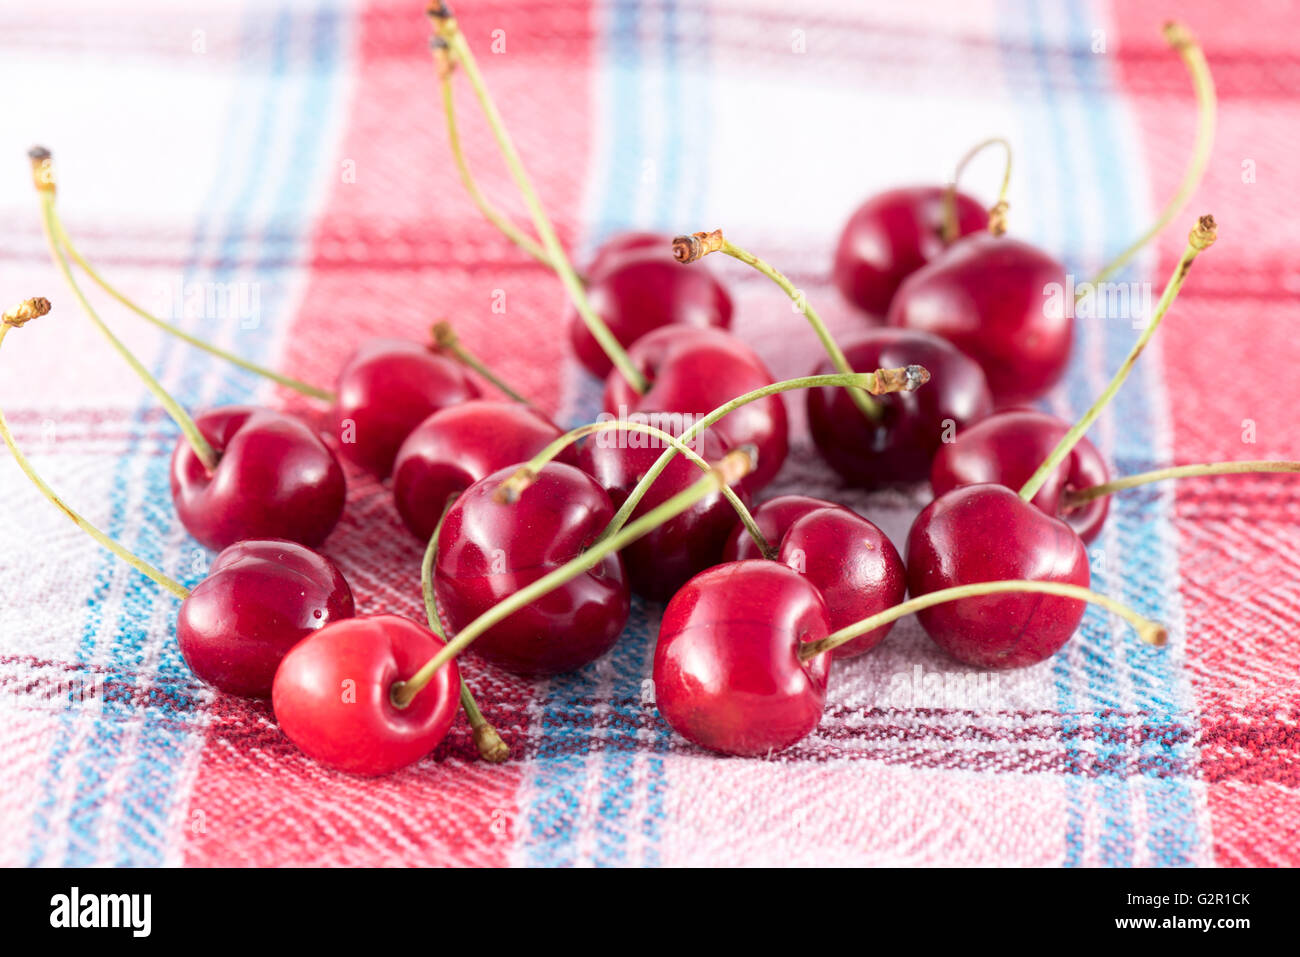 Sweet cherries group  on rustic tablecloth Stock Photo